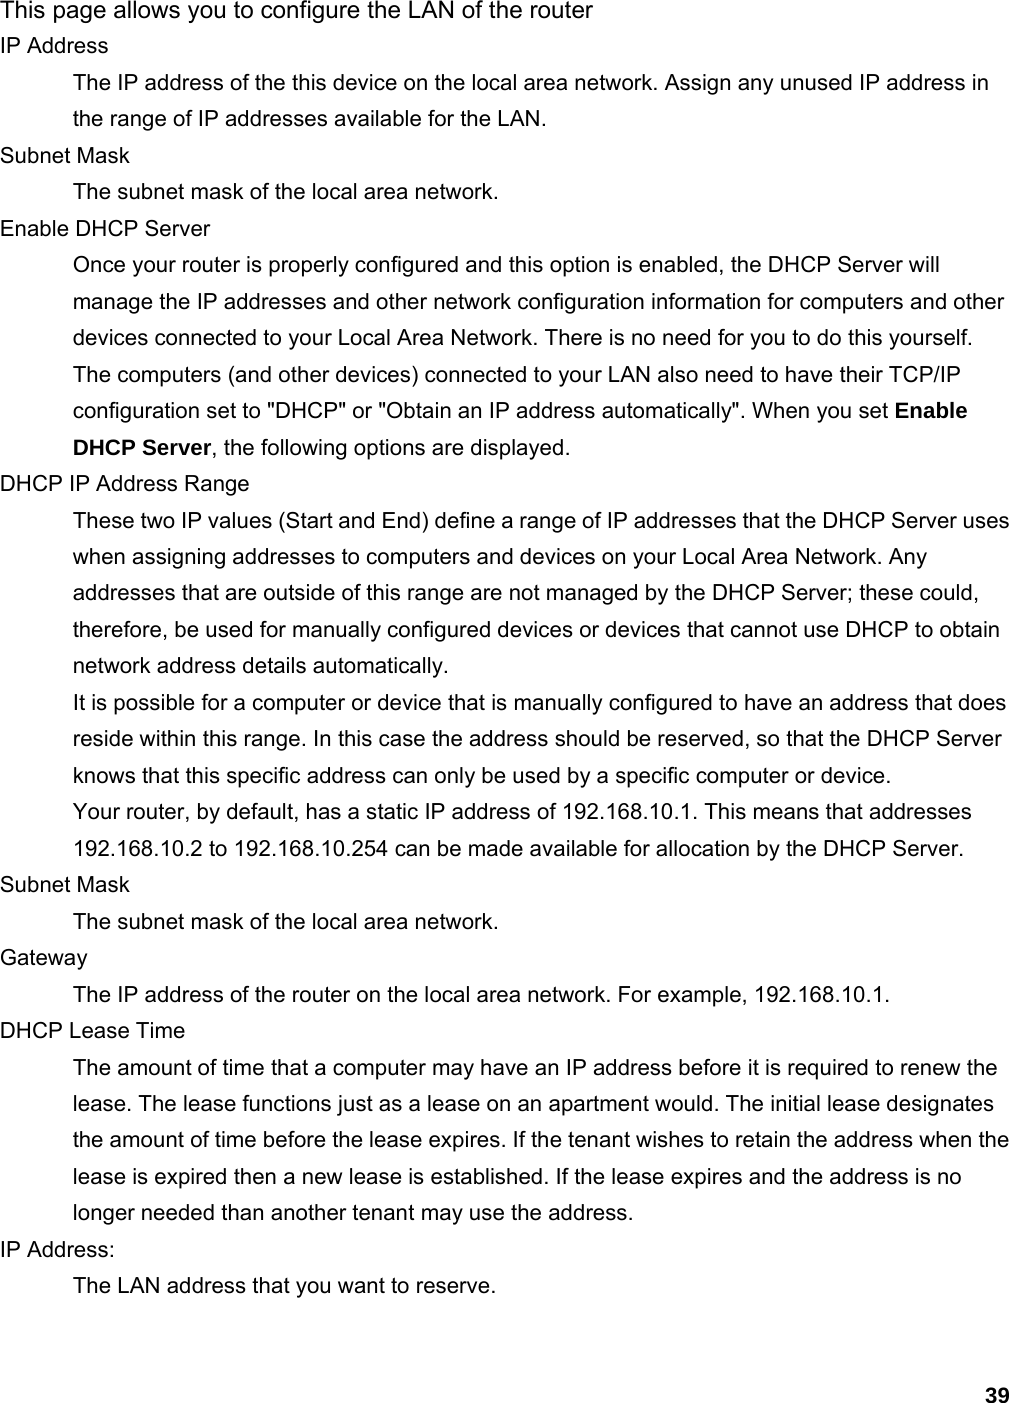 39 This page allows you to configure the LAN of the router IP Address   The IP address of the this device on the local area network. Assign any unused IP address in the range of IP addresses available for the LAN.   Subnet Mask   The subnet mask of the local area network.   Enable DHCP Server   Once your router is properly configured and this option is enabled, the DHCP Server will manage the IP addresses and other network configuration information for computers and other devices connected to your Local Area Network. There is no need for you to do this yourself.   The computers (and other devices) connected to your LAN also need to have their TCP/IP configuration set to &quot;DHCP&quot; or &quot;Obtain an IP address automatically&quot;. When you set Enable DHCP Server, the following options are displayed.   DHCP IP Address Range   These two IP values (Start and End) define a range of IP addresses that the DHCP Server uses when assigning addresses to computers and devices on your Local Area Network. Any addresses that are outside of this range are not managed by the DHCP Server; these could, therefore, be used for manually configured devices or devices that cannot use DHCP to obtain network address details automatically.   It is possible for a computer or device that is manually configured to have an address that does reside within this range. In this case the address should be reserved, so that the DHCP Server knows that this specific address can only be used by a specific computer or device.   Your router, by default, has a static IP address of 192.168.10.1. This means that addresses 192.168.10.2 to 192.168.10.254 can be made available for allocation by the DHCP Server.   Subnet Mask   The subnet mask of the local area network.   Gateway  The IP address of the router on the local area network. For example, 192.168.10.1.   DHCP Lease Time   The amount of time that a computer may have an IP address before it is required to renew the lease. The lease functions just as a lease on an apartment would. The initial lease designates the amount of time before the lease expires. If the tenant wishes to retain the address when the lease is expired then a new lease is established. If the lease expires and the address is no longer needed than another tenant may use the address.   IP Address:   The LAN address that you want to reserve.    